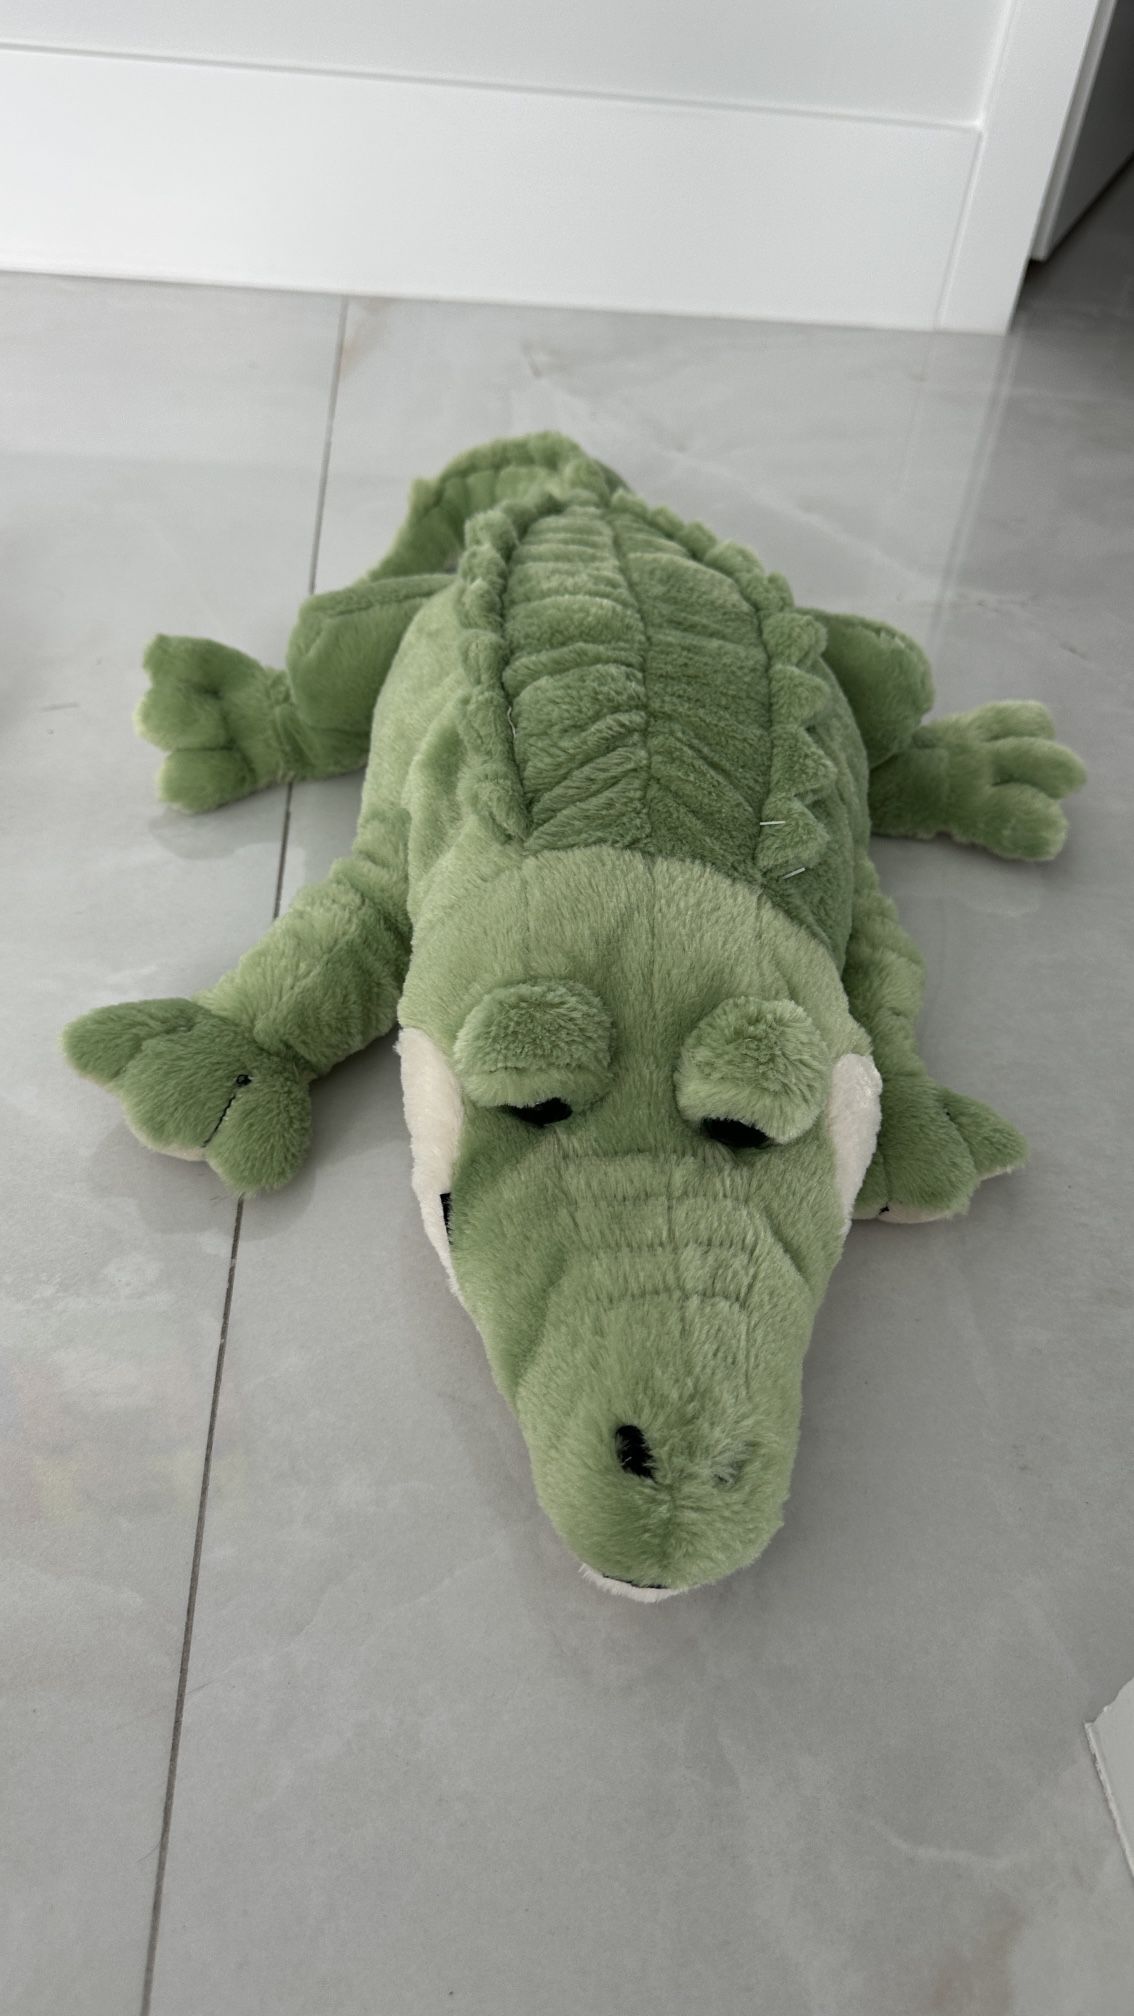 Giant Stuffed Plush Alligator At 56 Inches Long